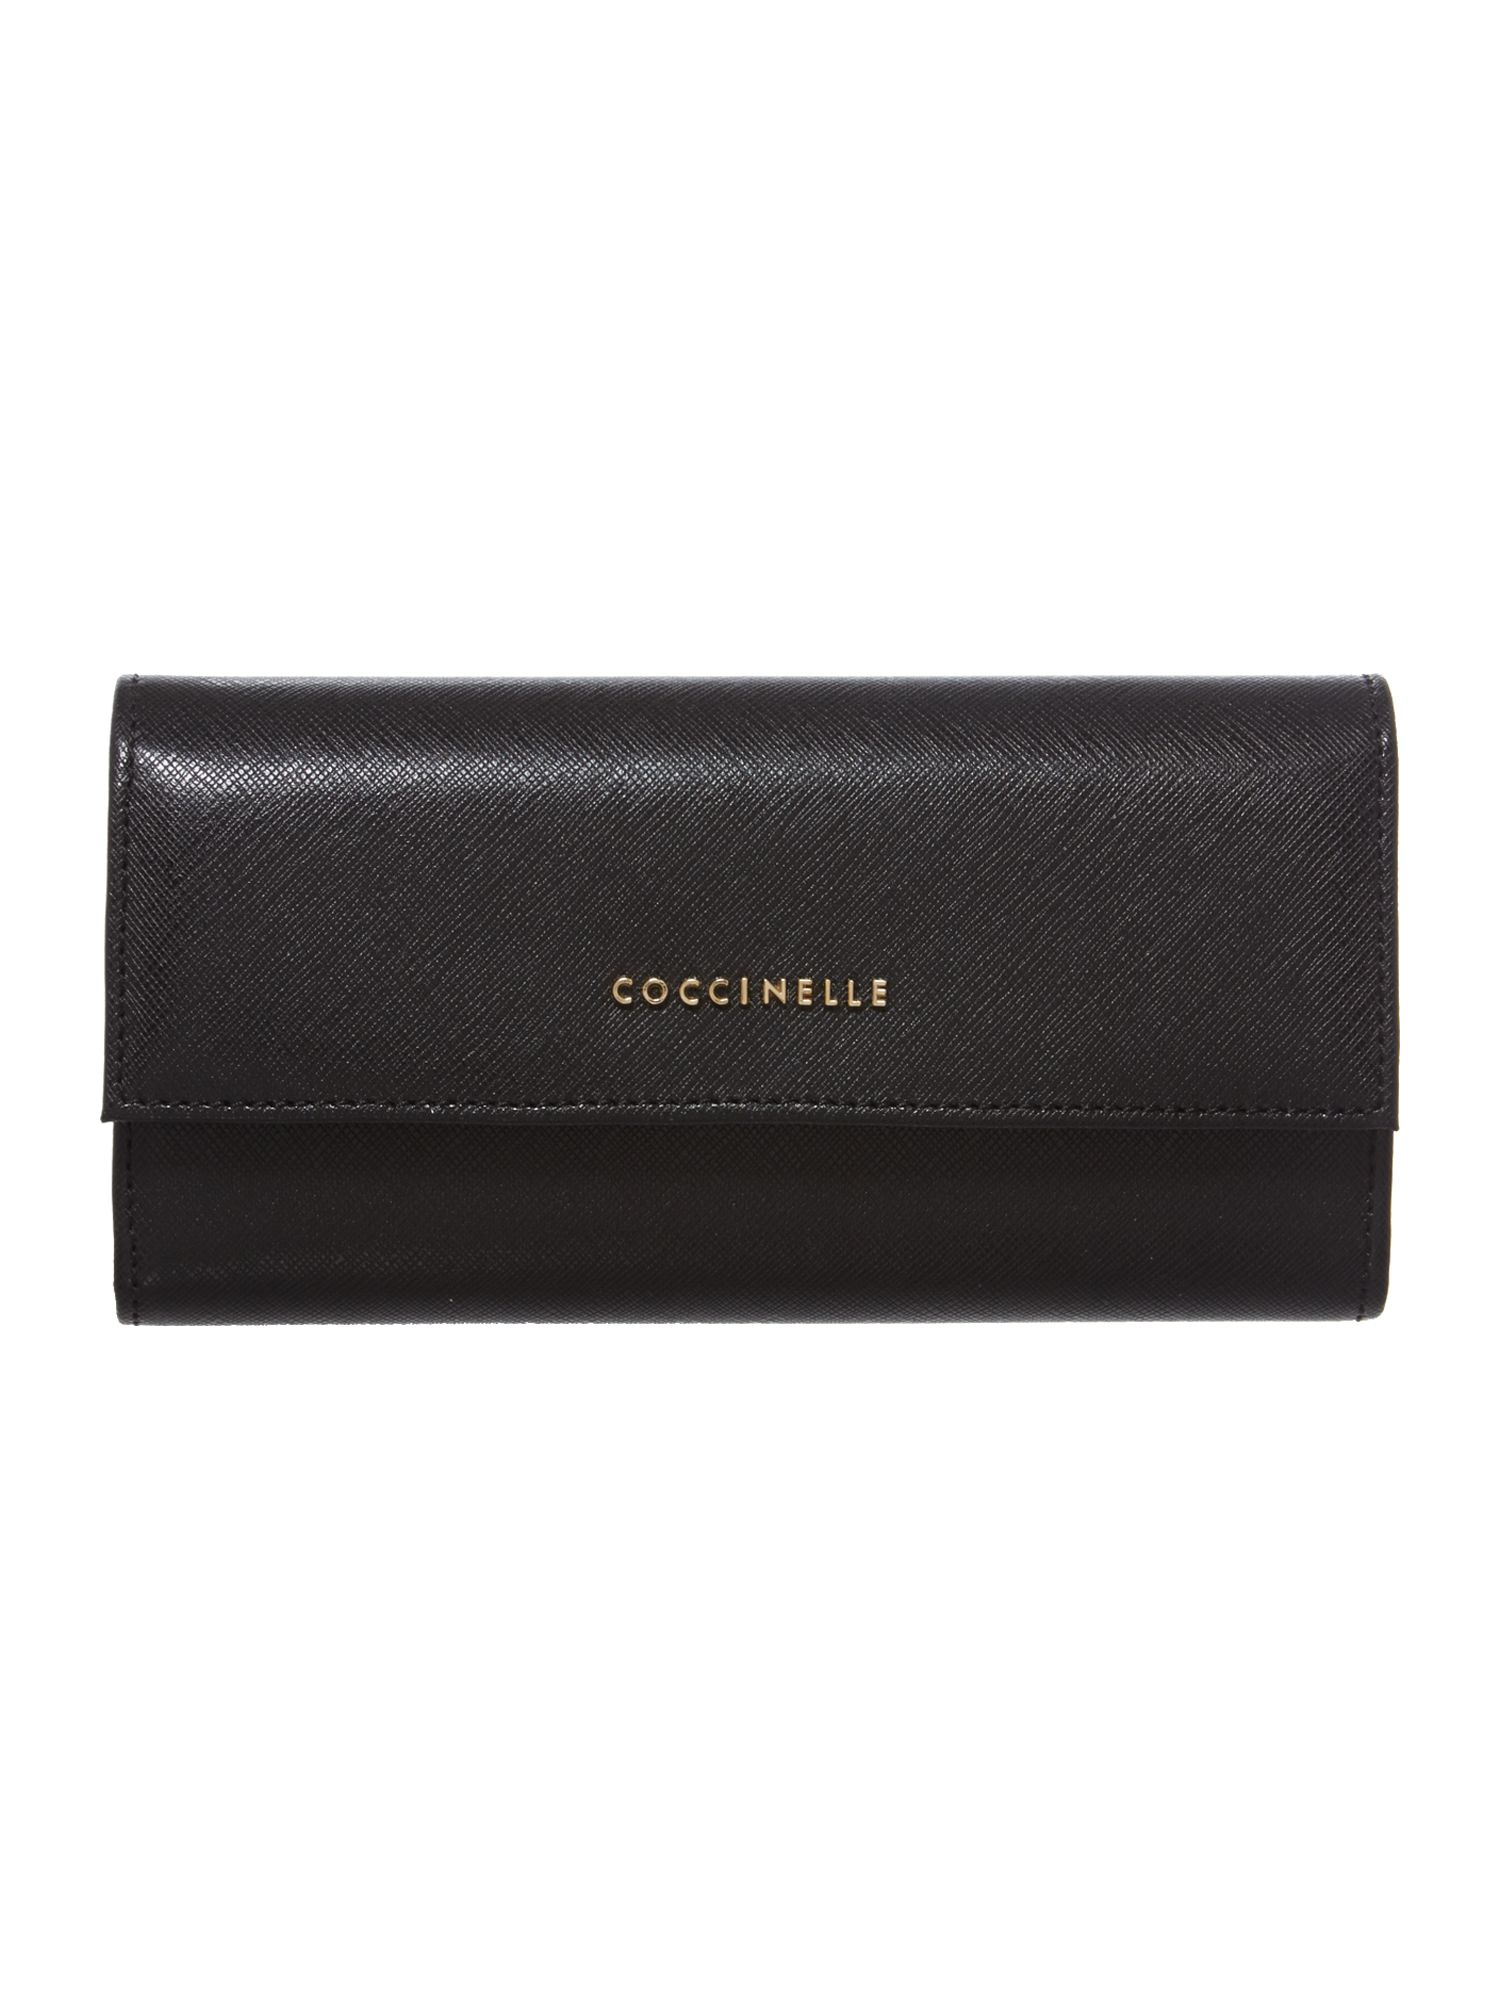 Coccinelle Saffiano Black Large Flap Over Purse in Black | Lyst